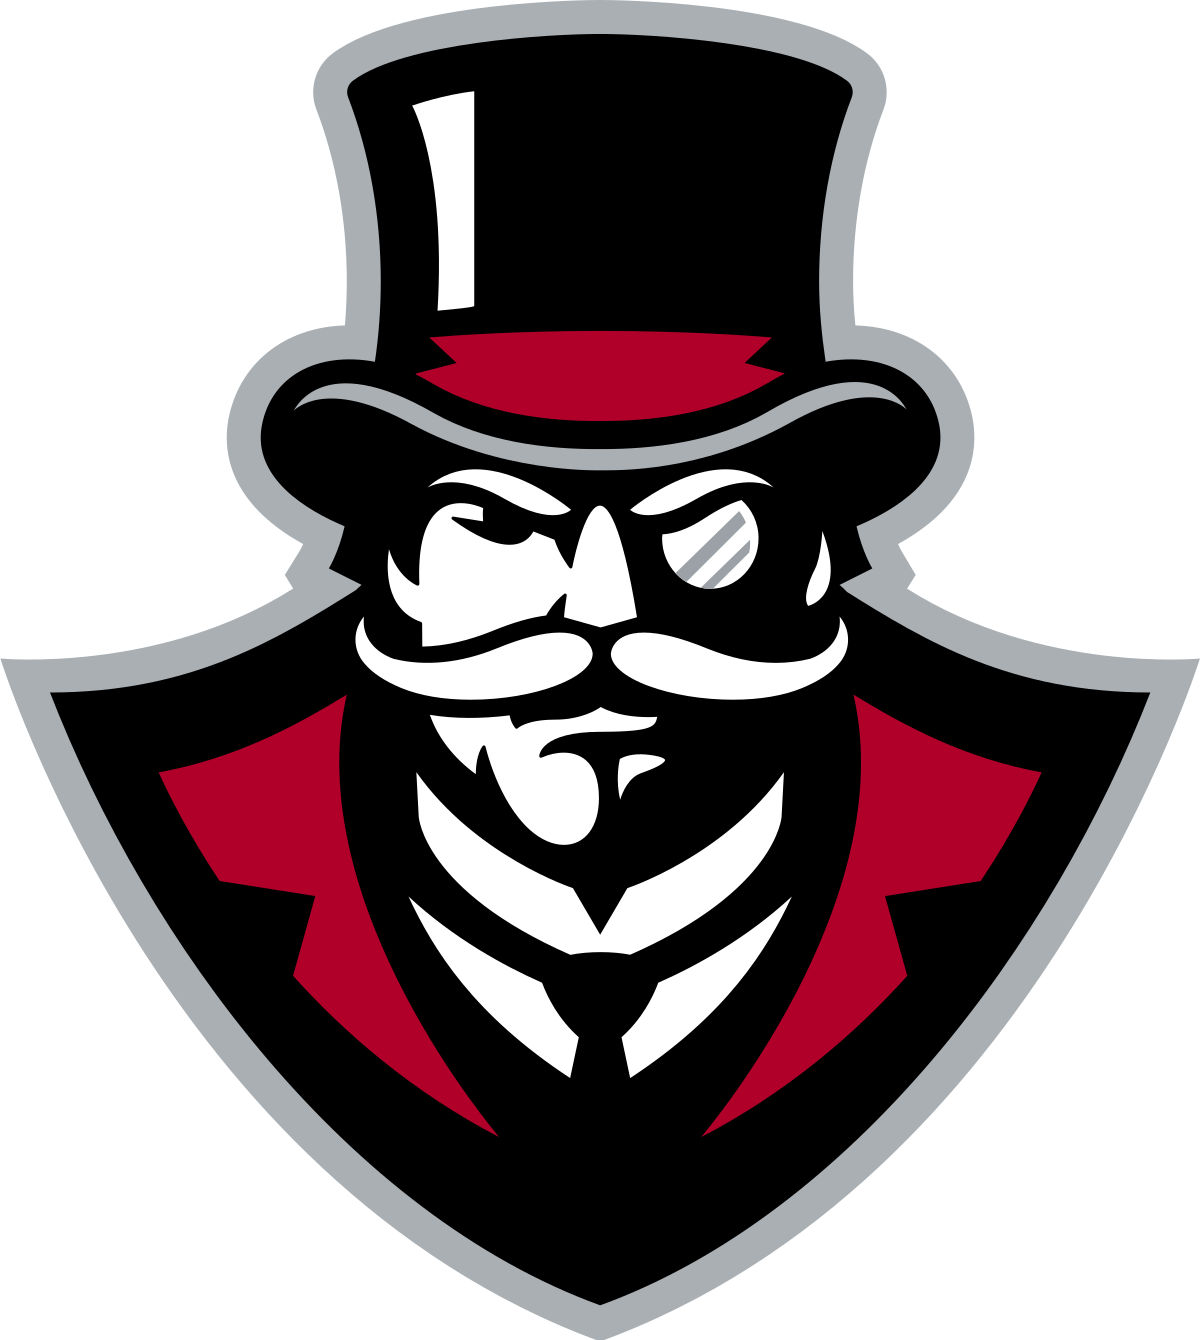 Austin_Peay_Governors_logo.svg